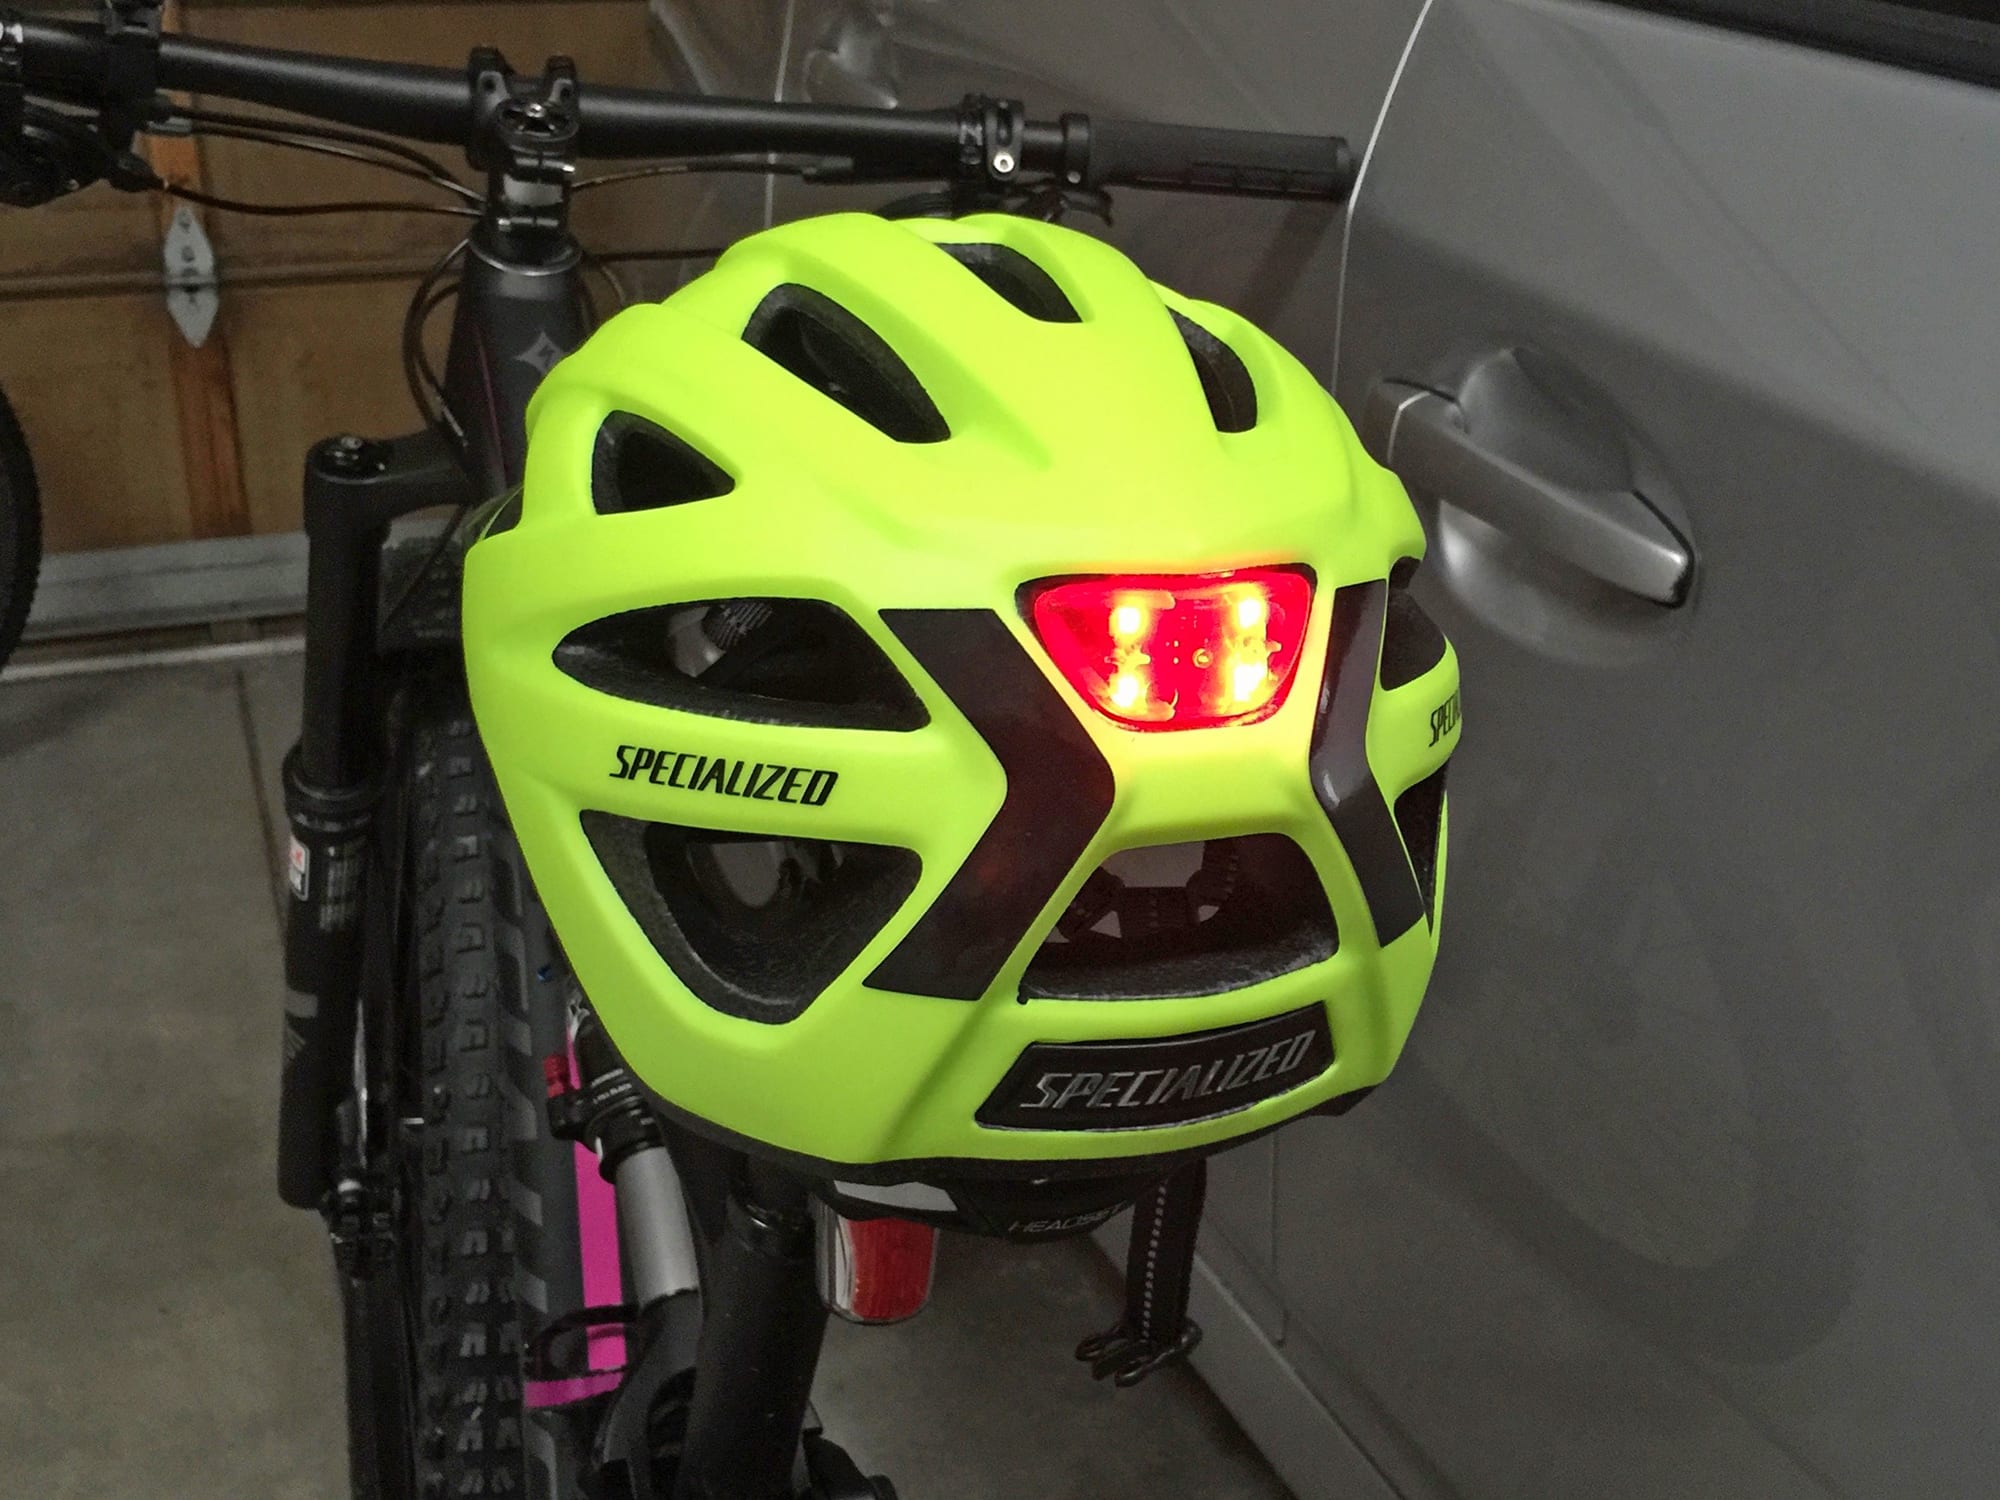 Specialized Centro LED Helmet Review 